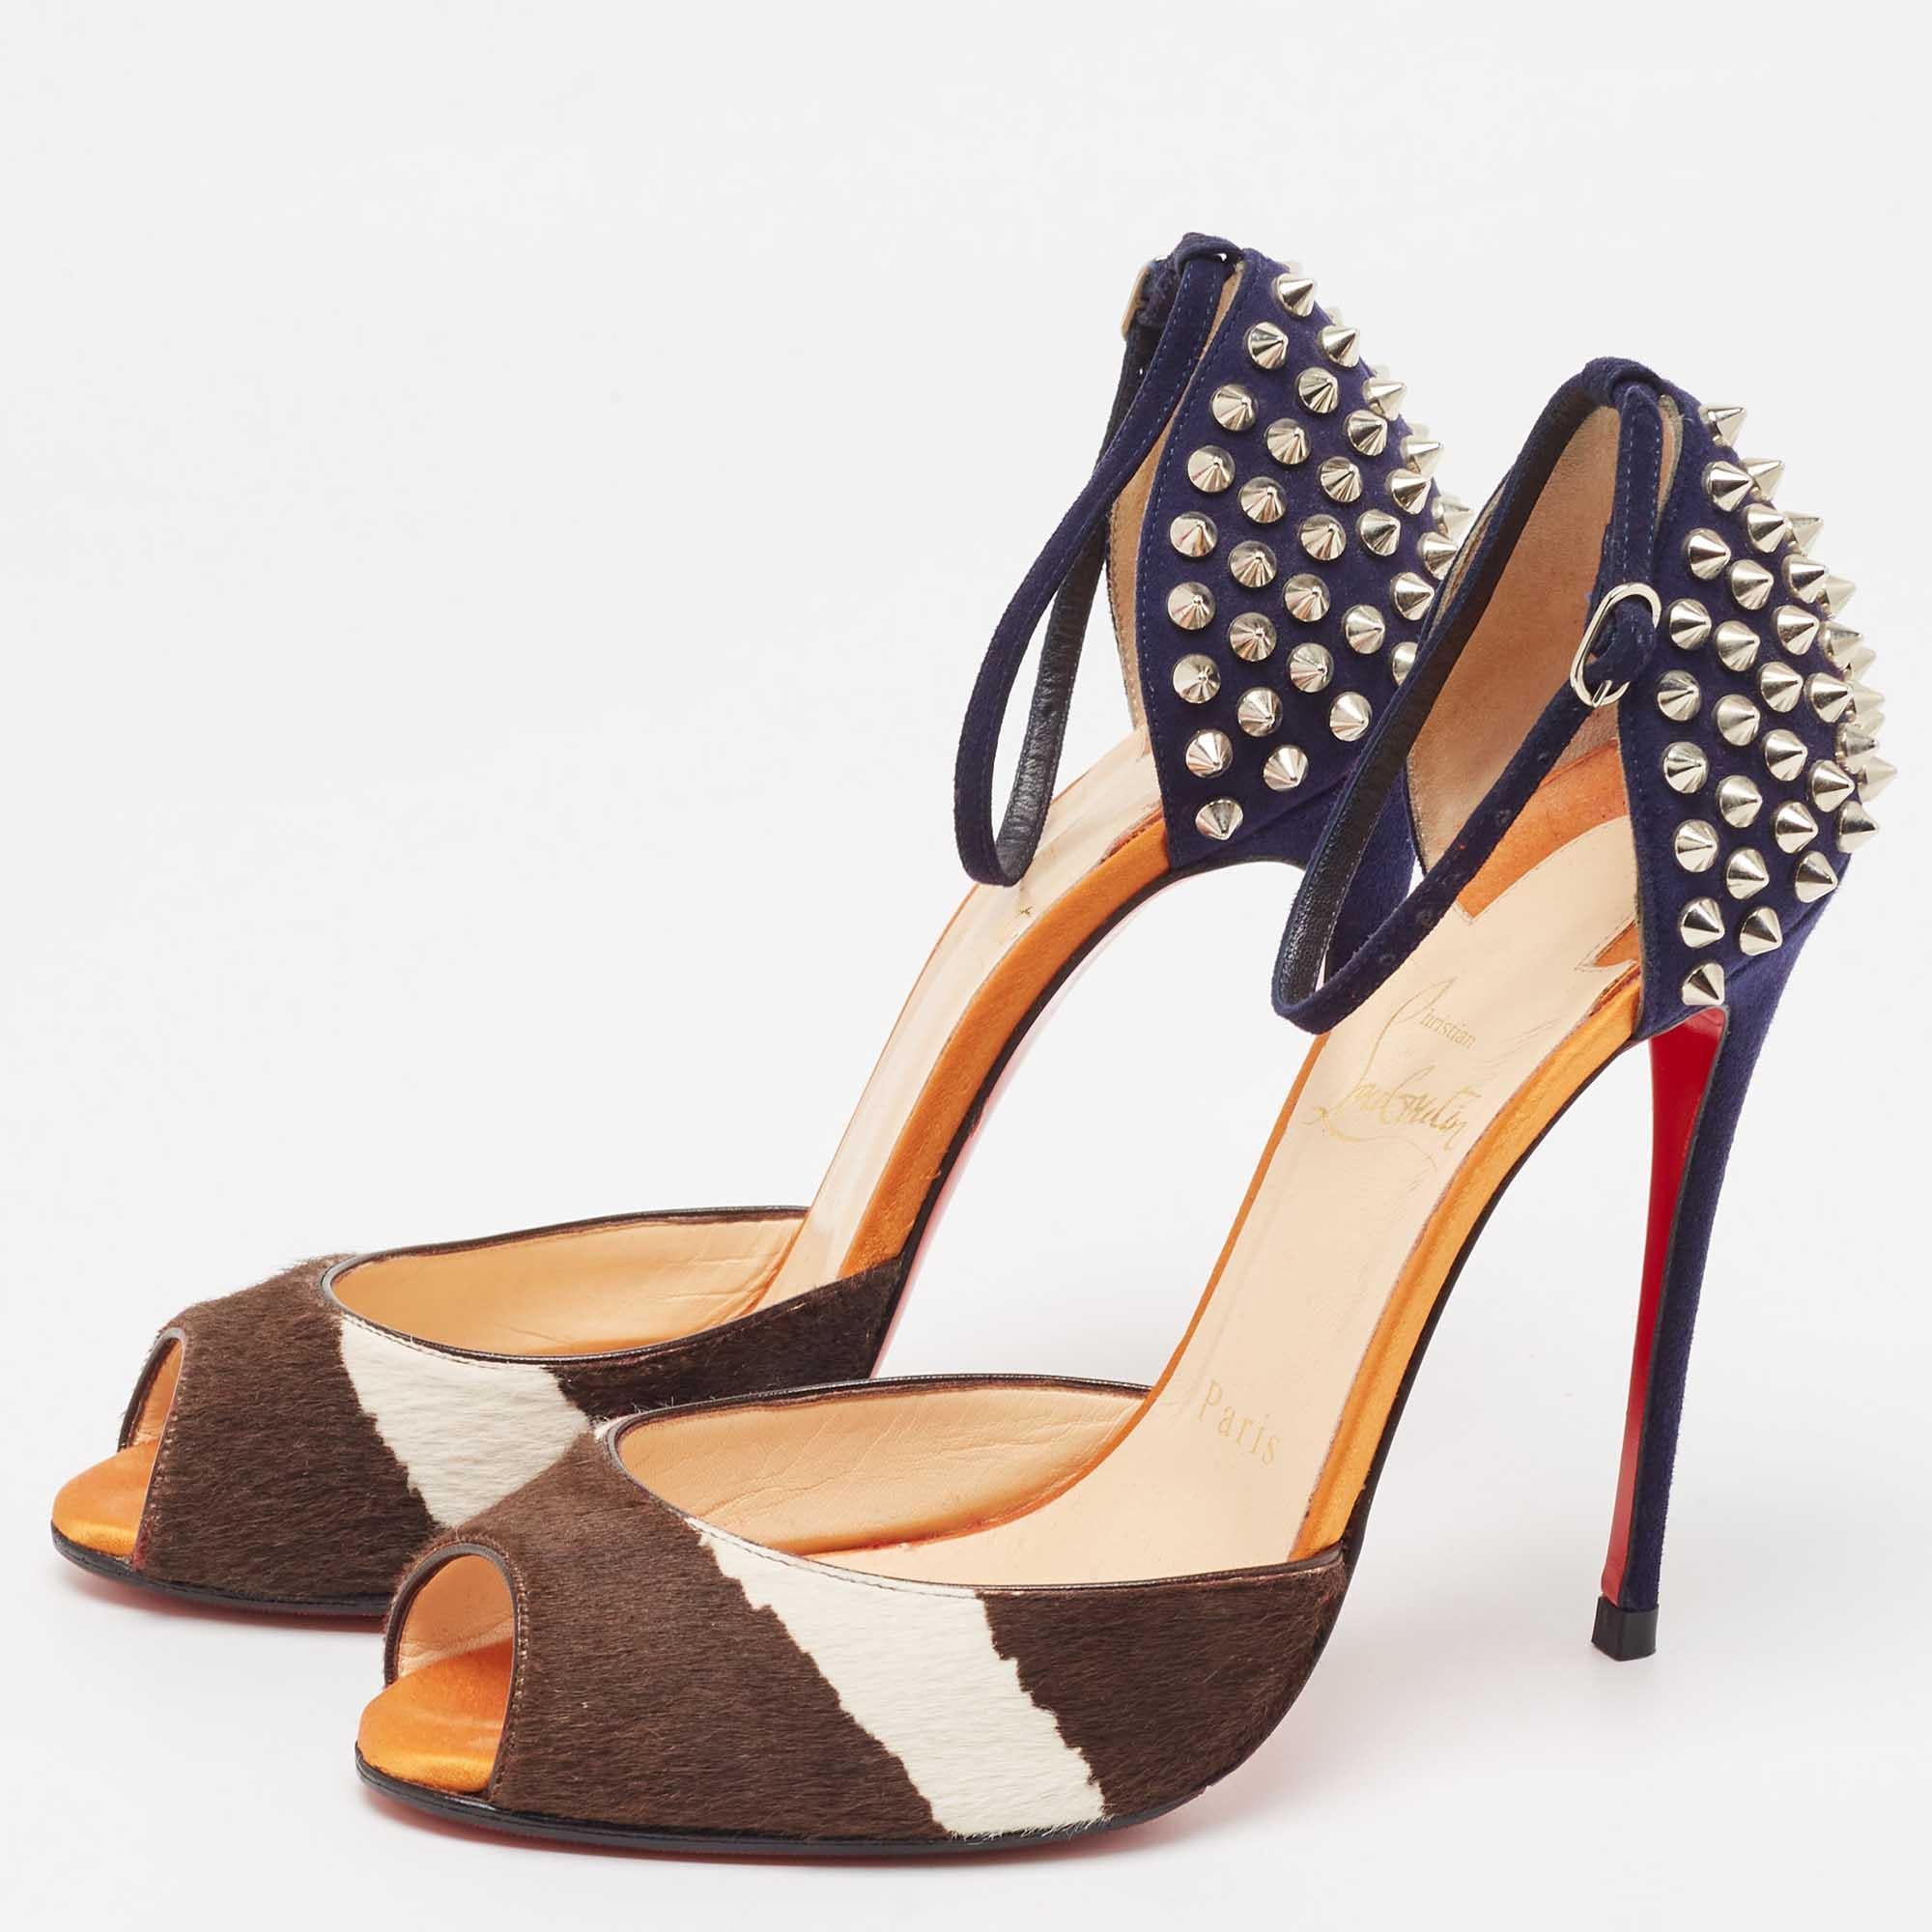 Christian Louboutin Tricolor Calf Hair and Suede Pina Spike Sandals Size 37 4